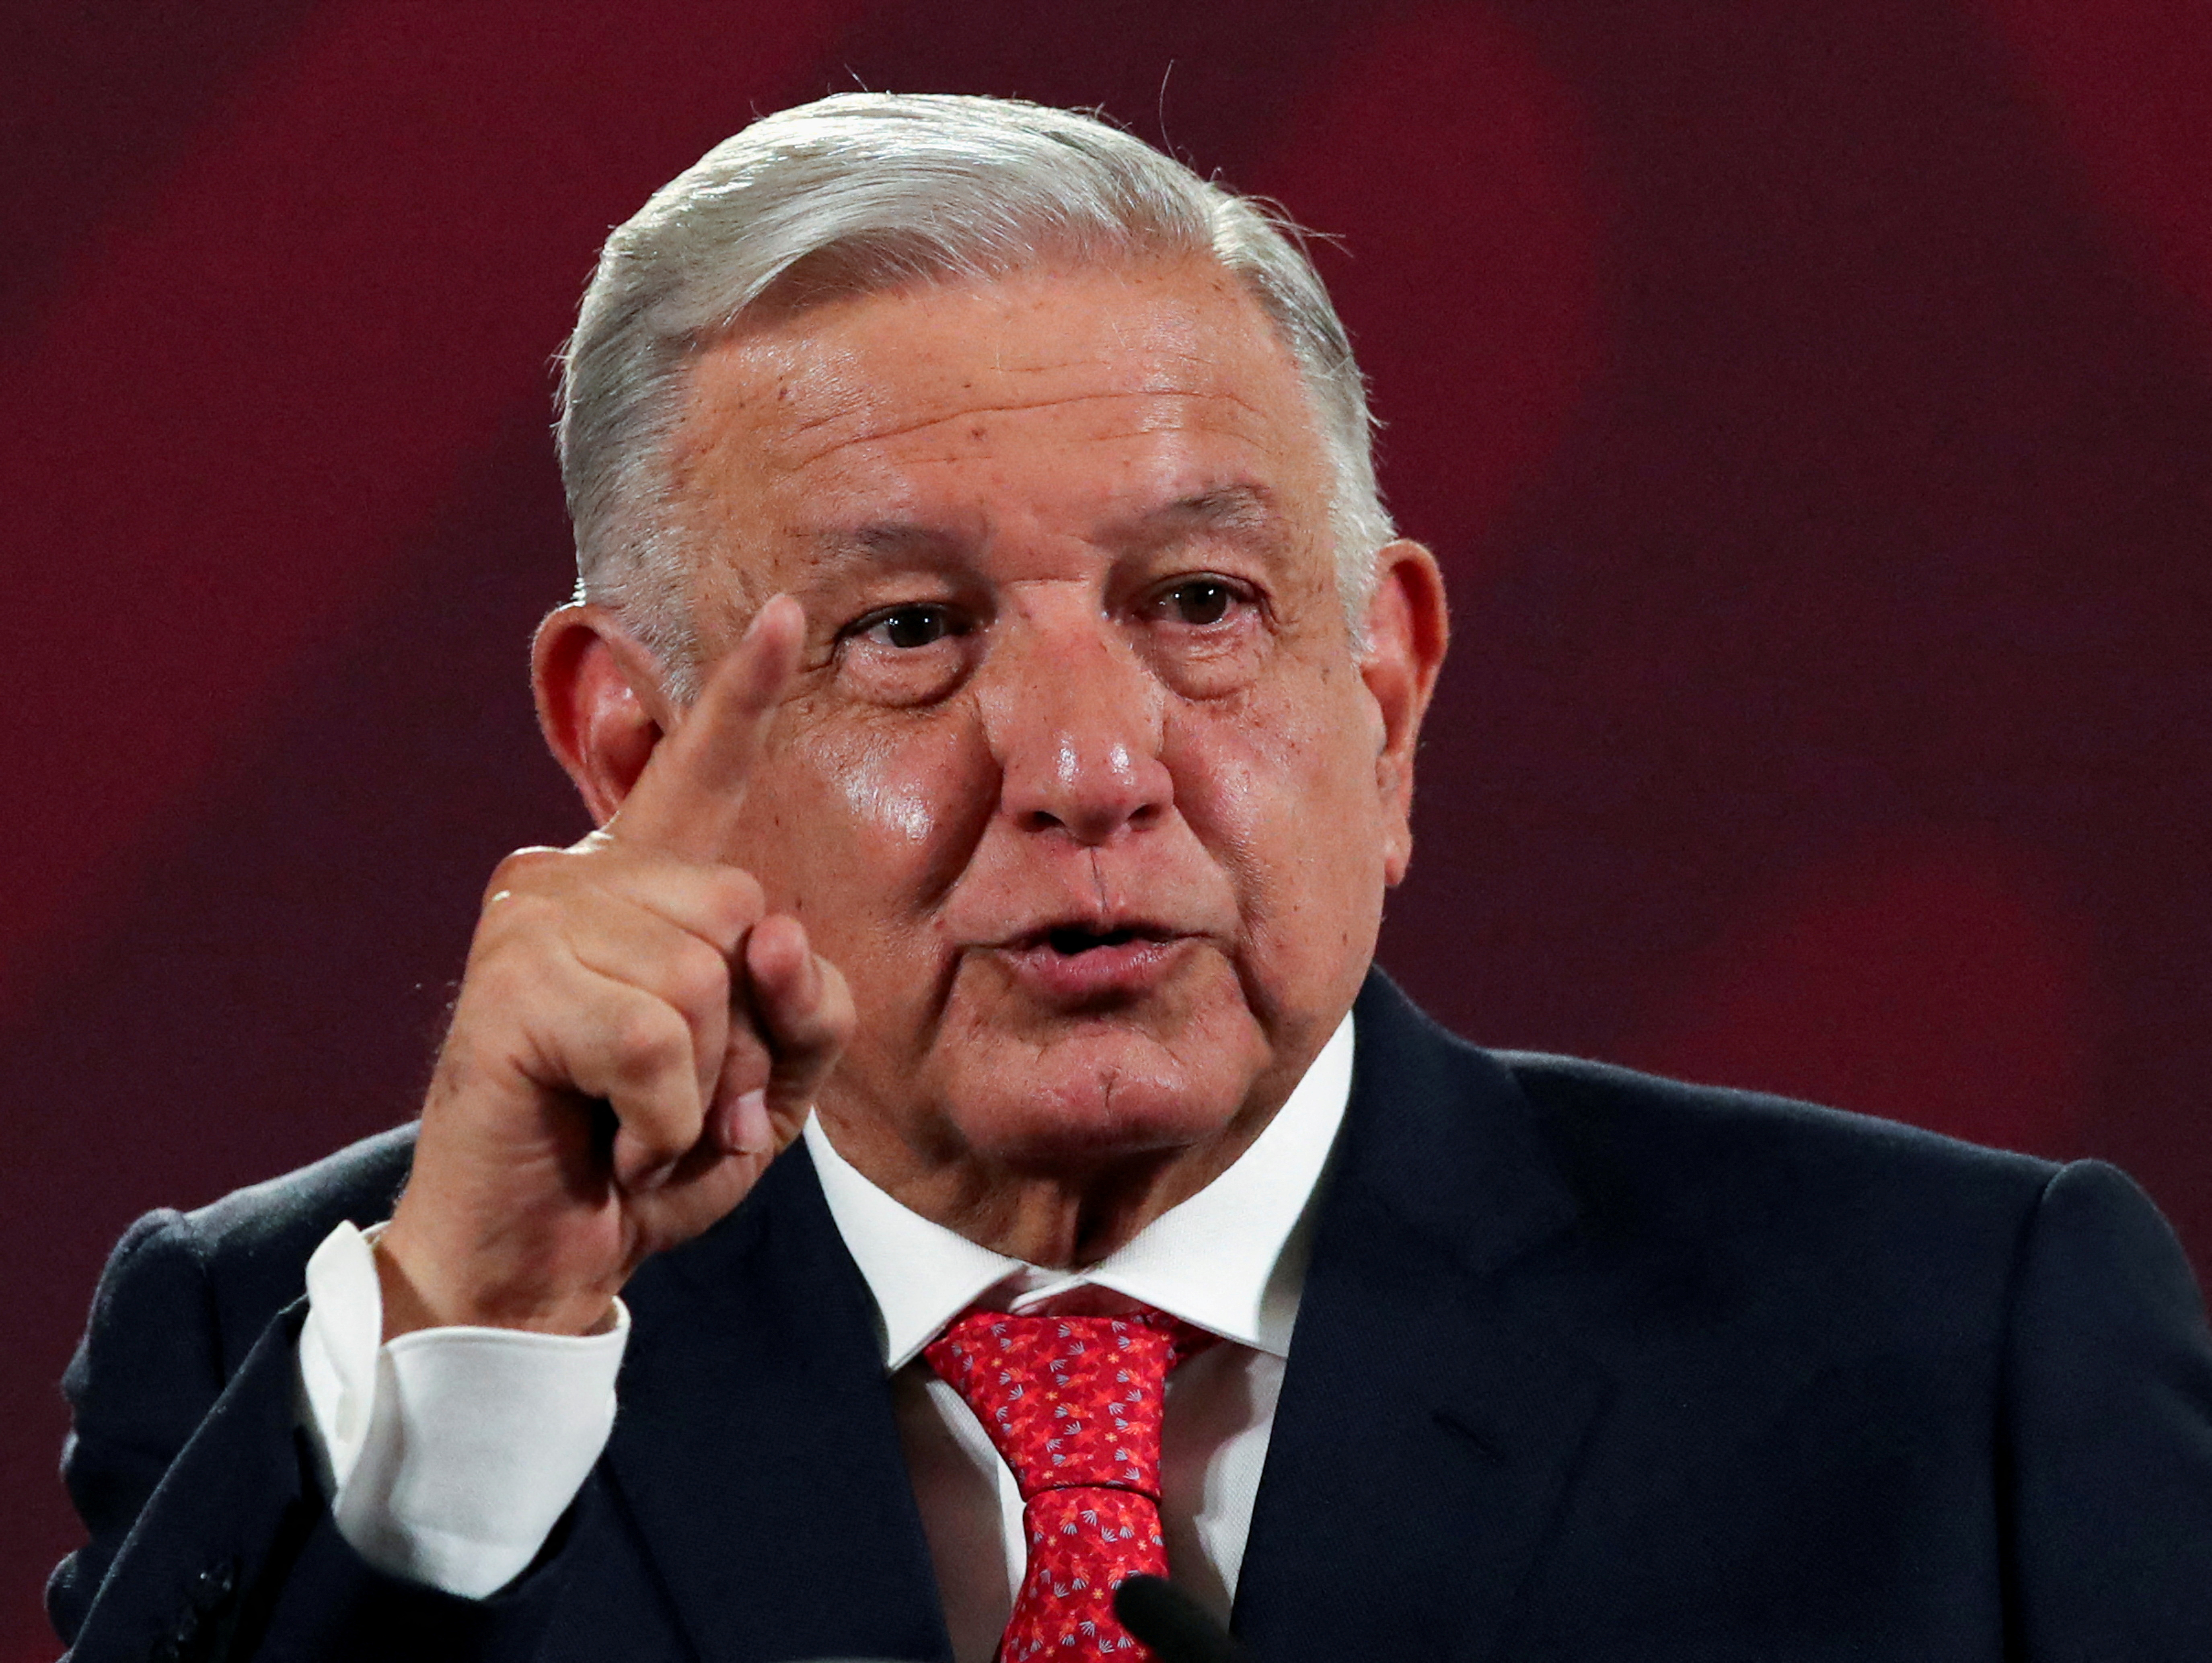 Analysis-Mexico president puts unity first to broker compromise in succession race